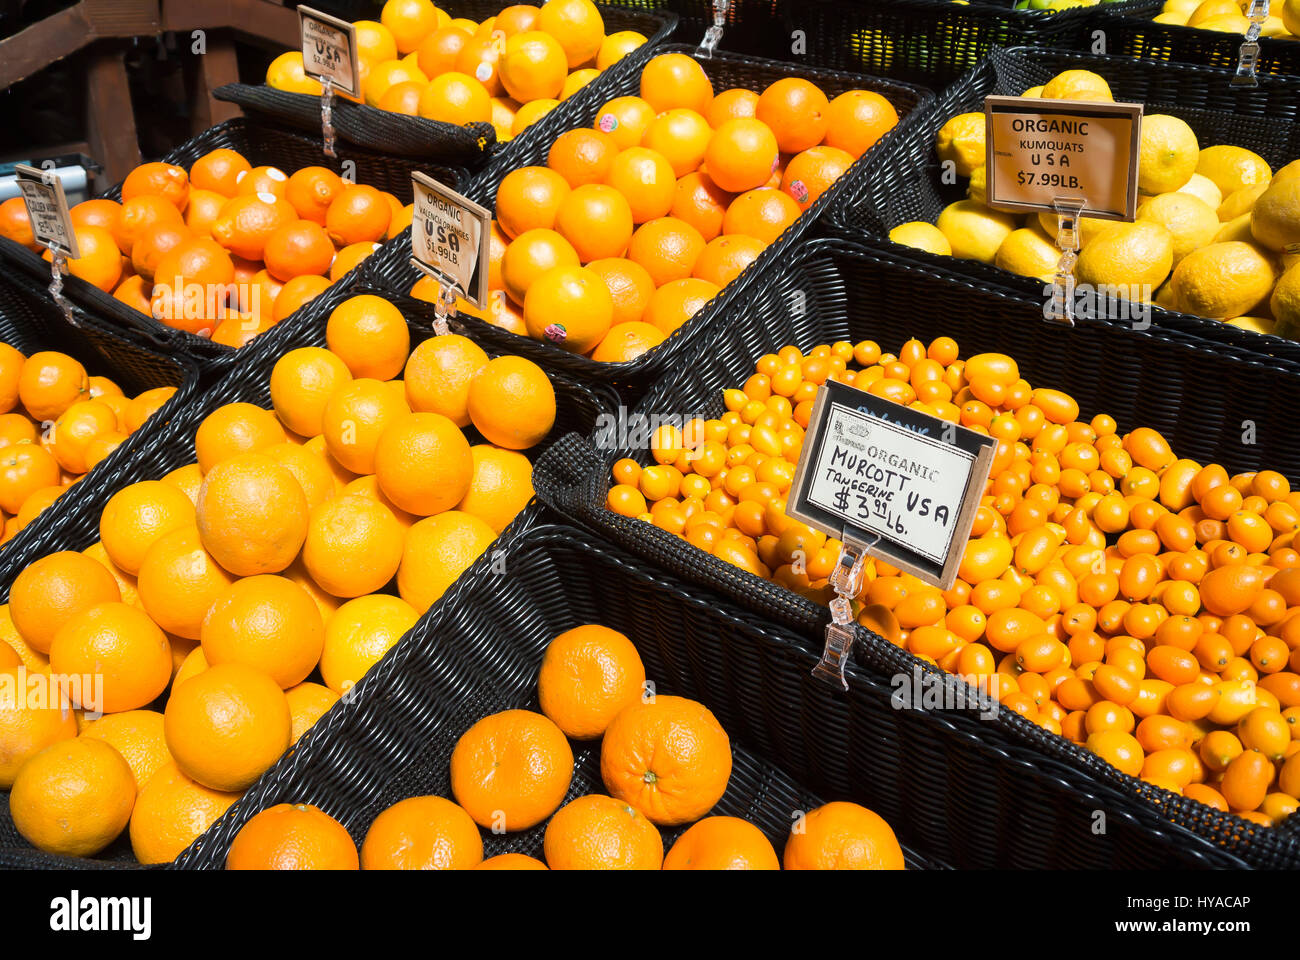 Citrus Fruits on Display for Purchase Stock Photo